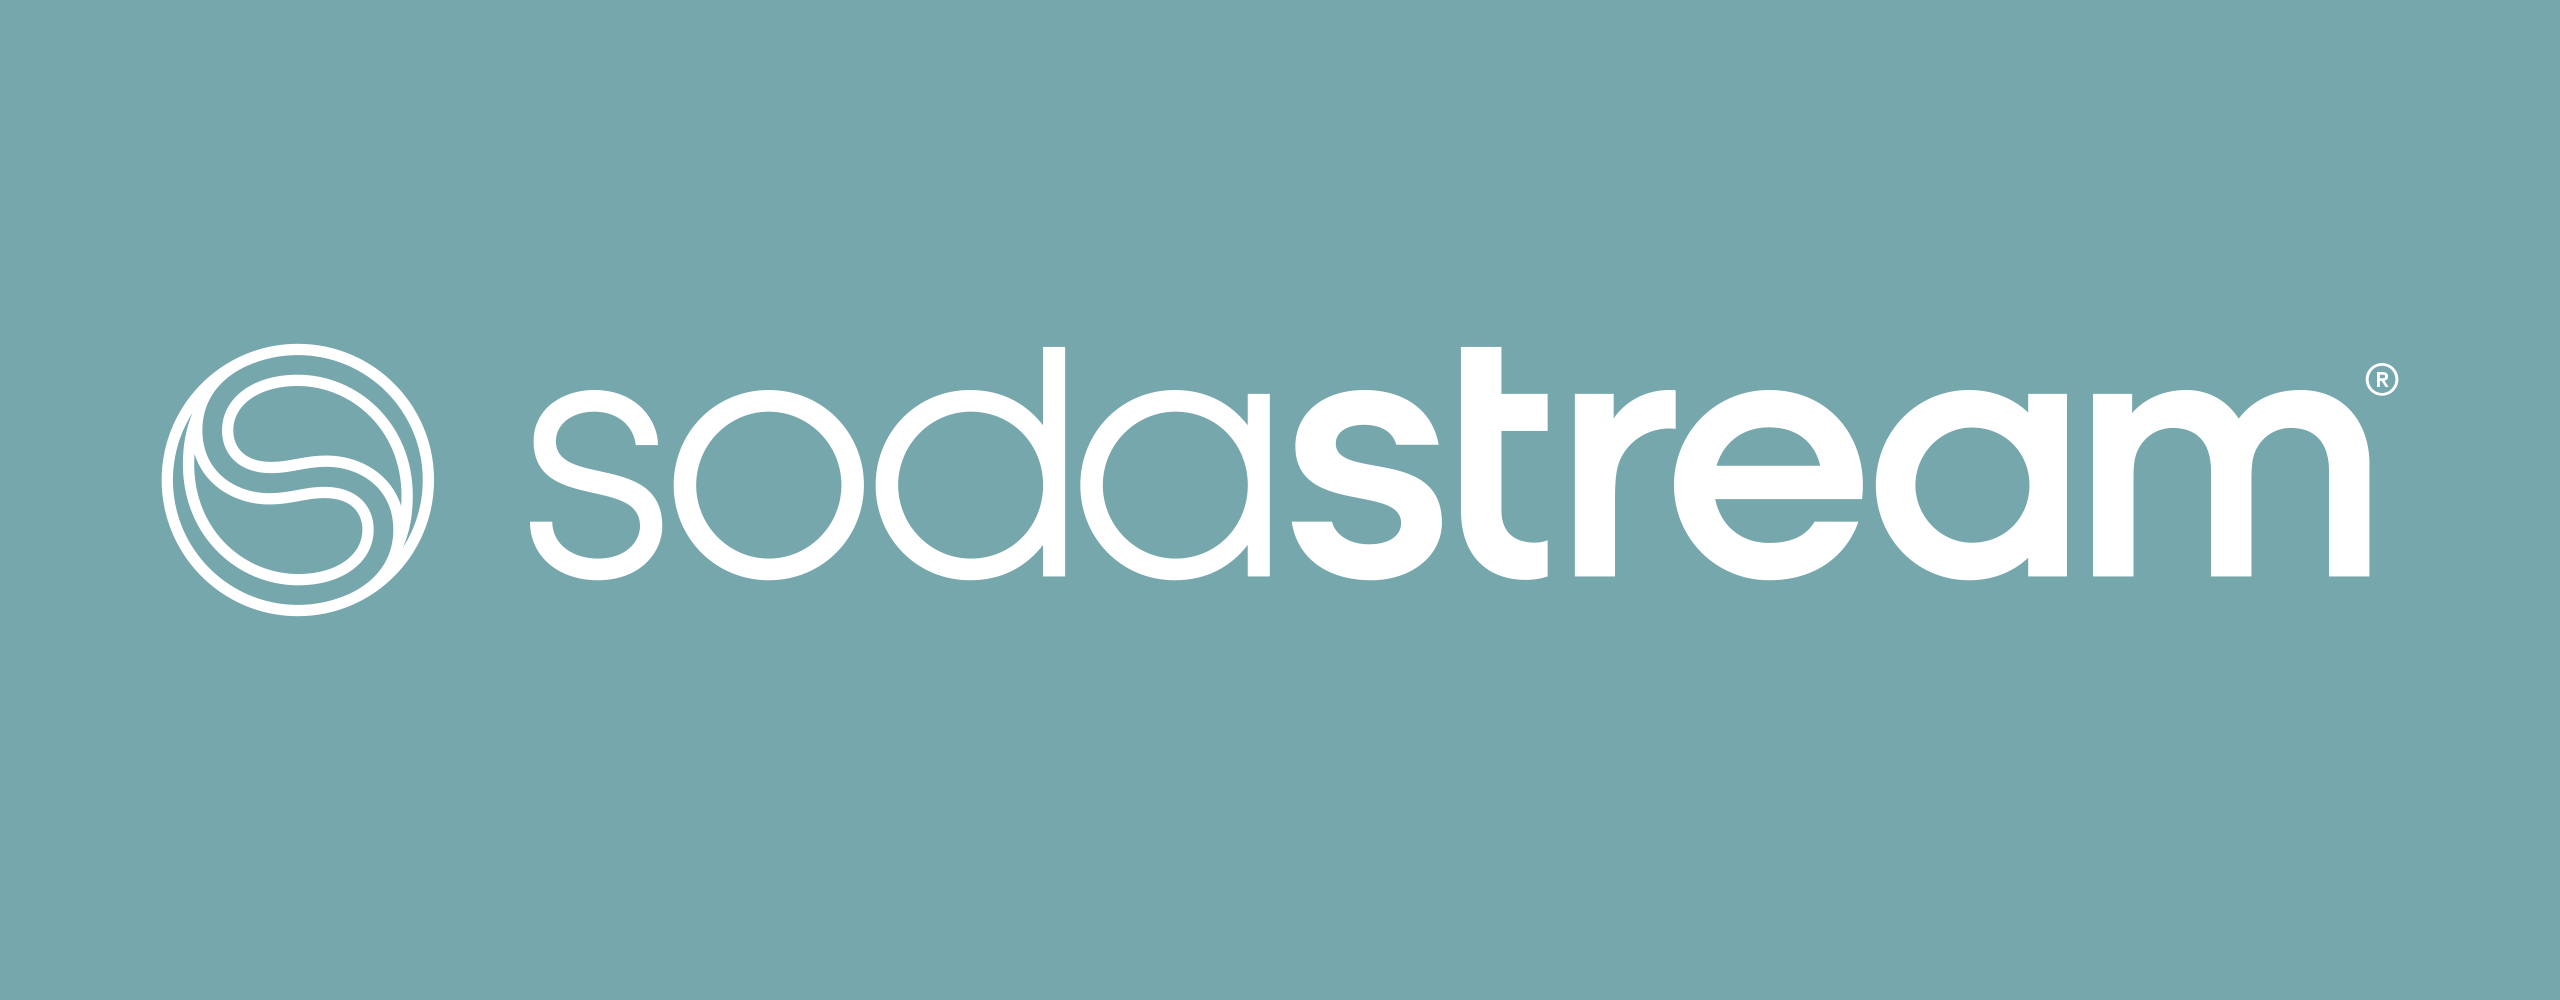 Sodastream Wordmark and symbol by Dan Forster and Pearlfisher -hero2